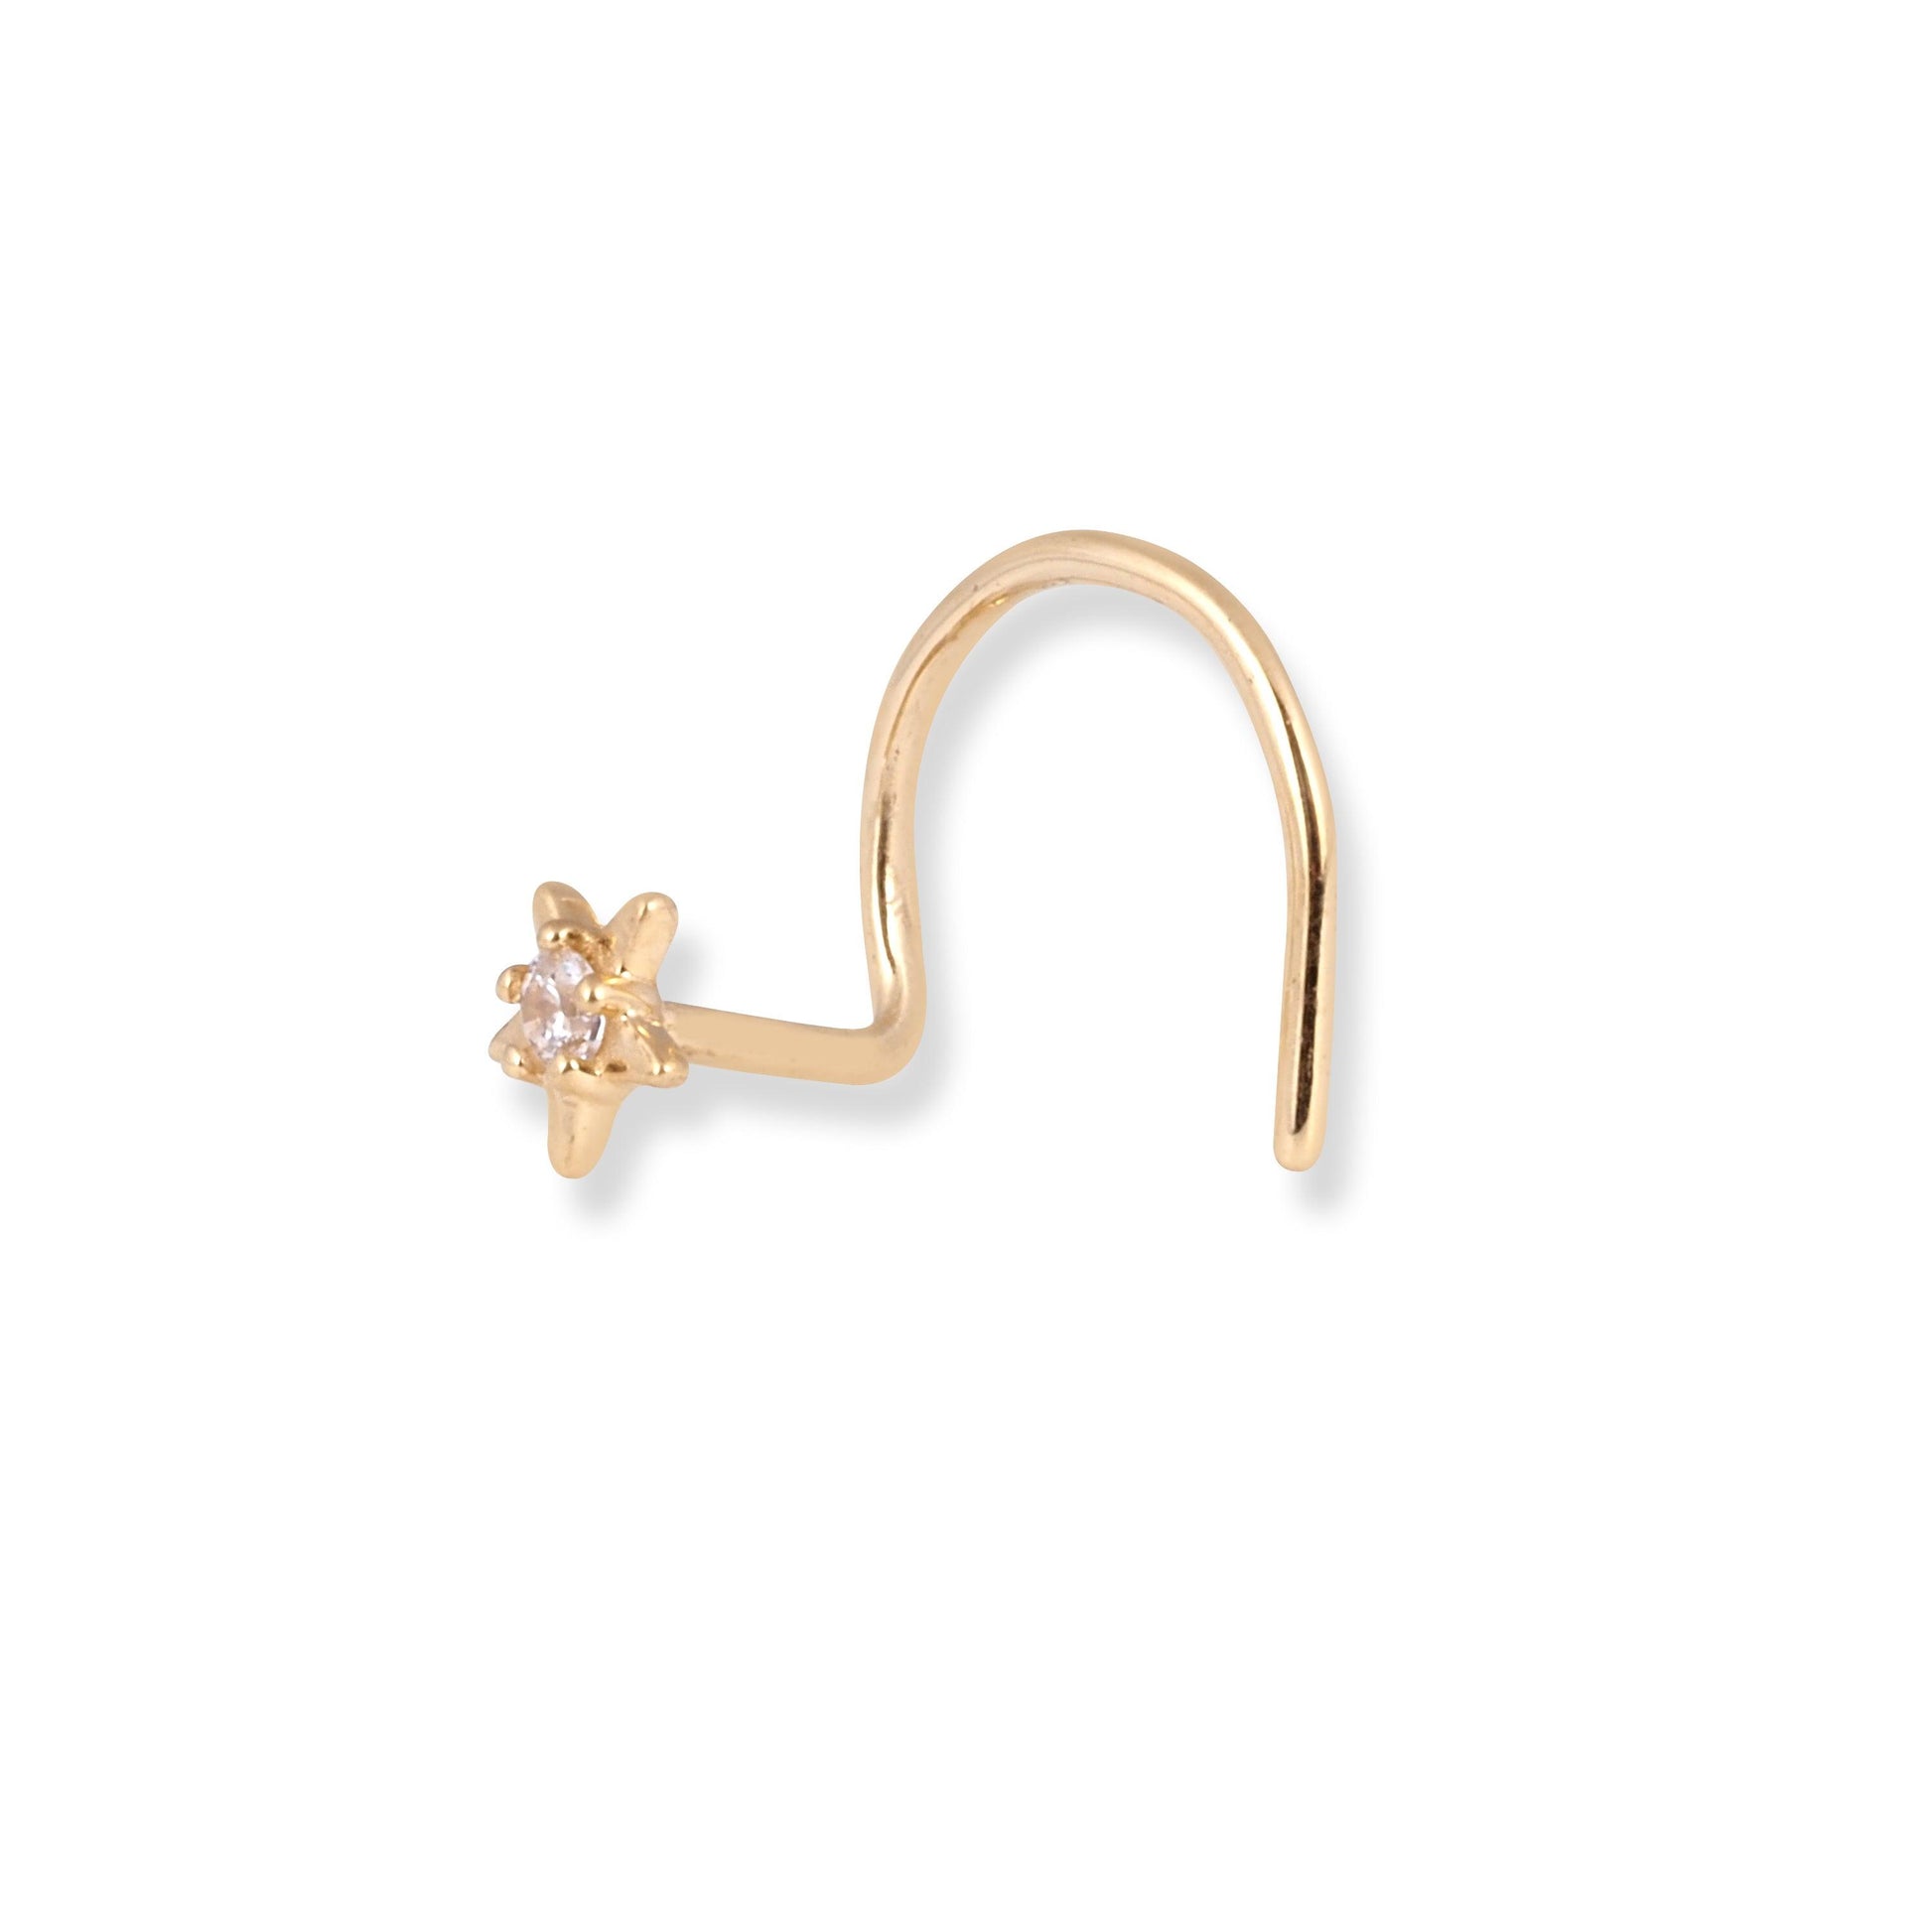 18ct Yellow Gold Star Shaped Wire Back Nose Stud with Cubic Zirconia Stone NS-7566 - Minar Jewellers